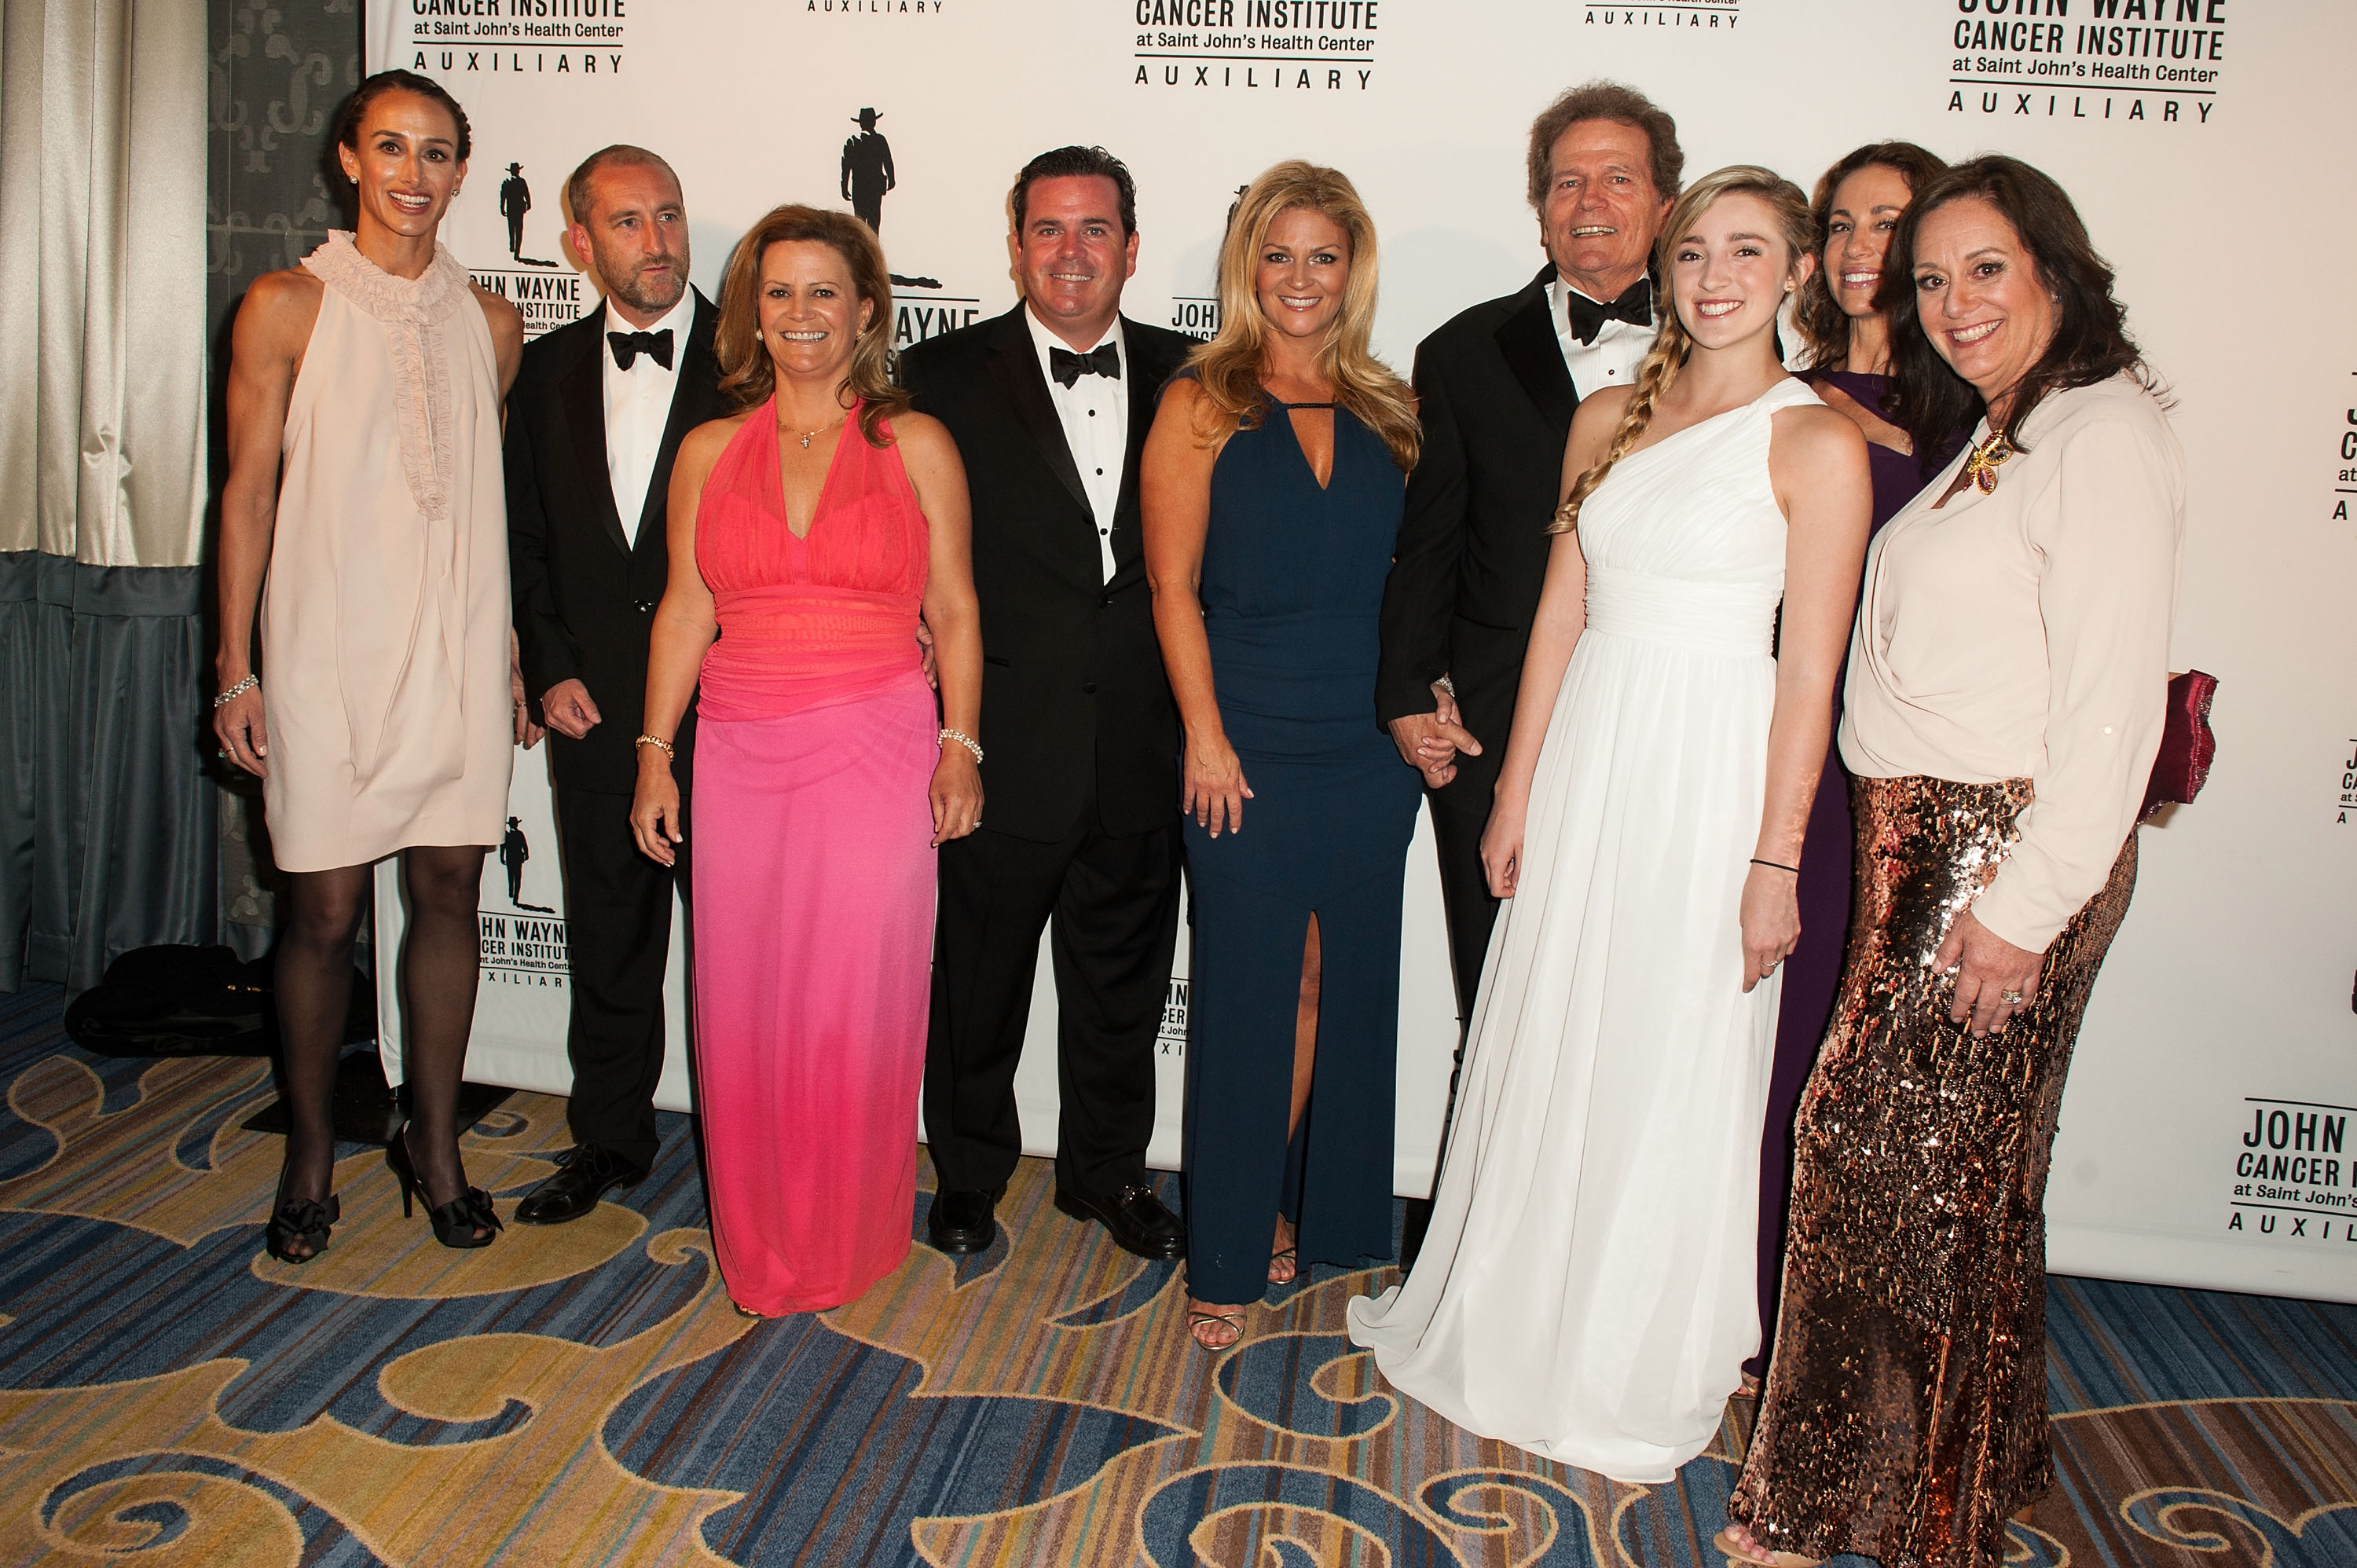 John Wayne's family during the John Wayne Cancer Institute Auxiliary's 29th Annual Odyssey Ball hosted at the Regent Beverly Wilshire Hotel on April 5, 2014 in Beverly Hills, California. | Source: Getty Images